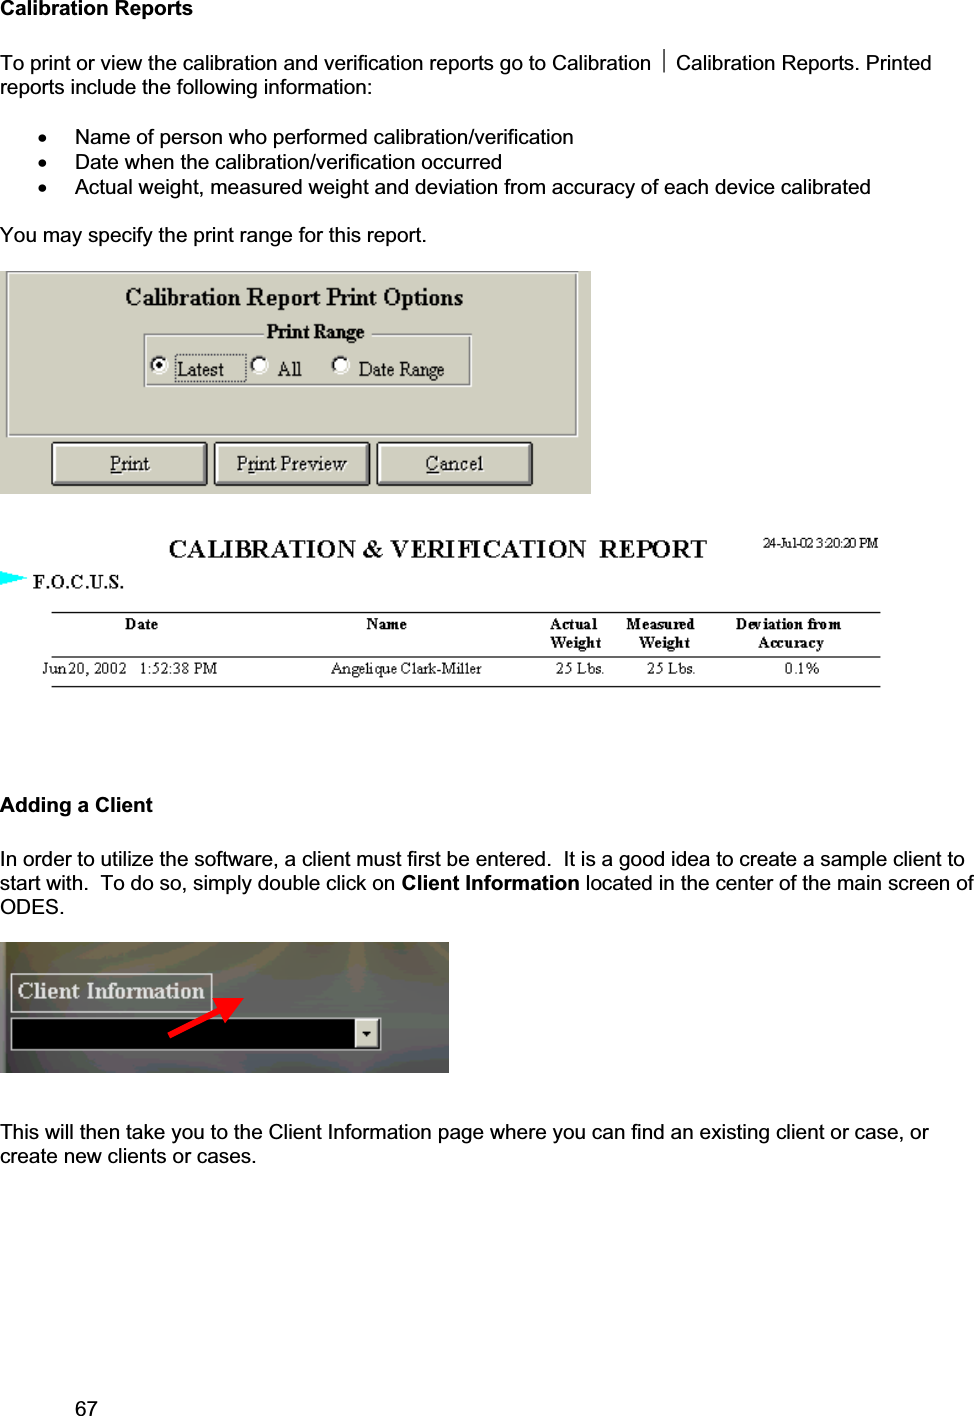 67     Calibration Reports To print or view the calibration and verification reports go to Calibration ~ Calibration Reports. Printed reports include the following information: x Name of person who performed calibration/verification x Date when the calibration/verification occurred x Actual weight, measured weight and deviation from accuracy of each device calibrated You may specify the print range for this report. Adding a Client In order to utilize the software, a client must first be entered.  It is a good idea to create a sample client to start with.  To do so, simply double click on Client Information located in the center of the main screen of ODES.This will then take you to the Client Information page where you can find an existing client or case, or create new clients or cases. 